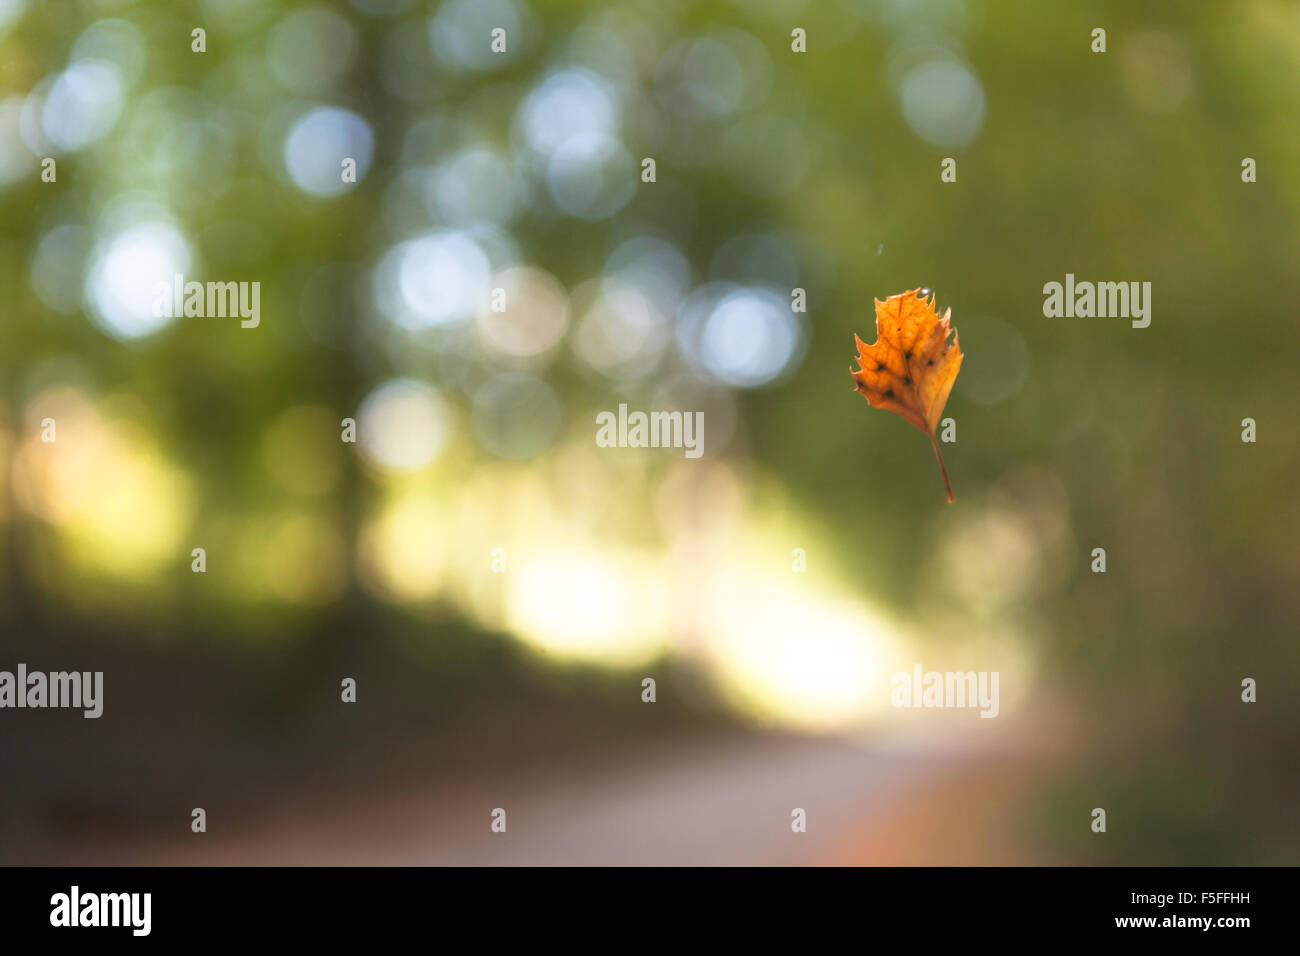 One autumn leaf falling with bokeh background Stock Photo